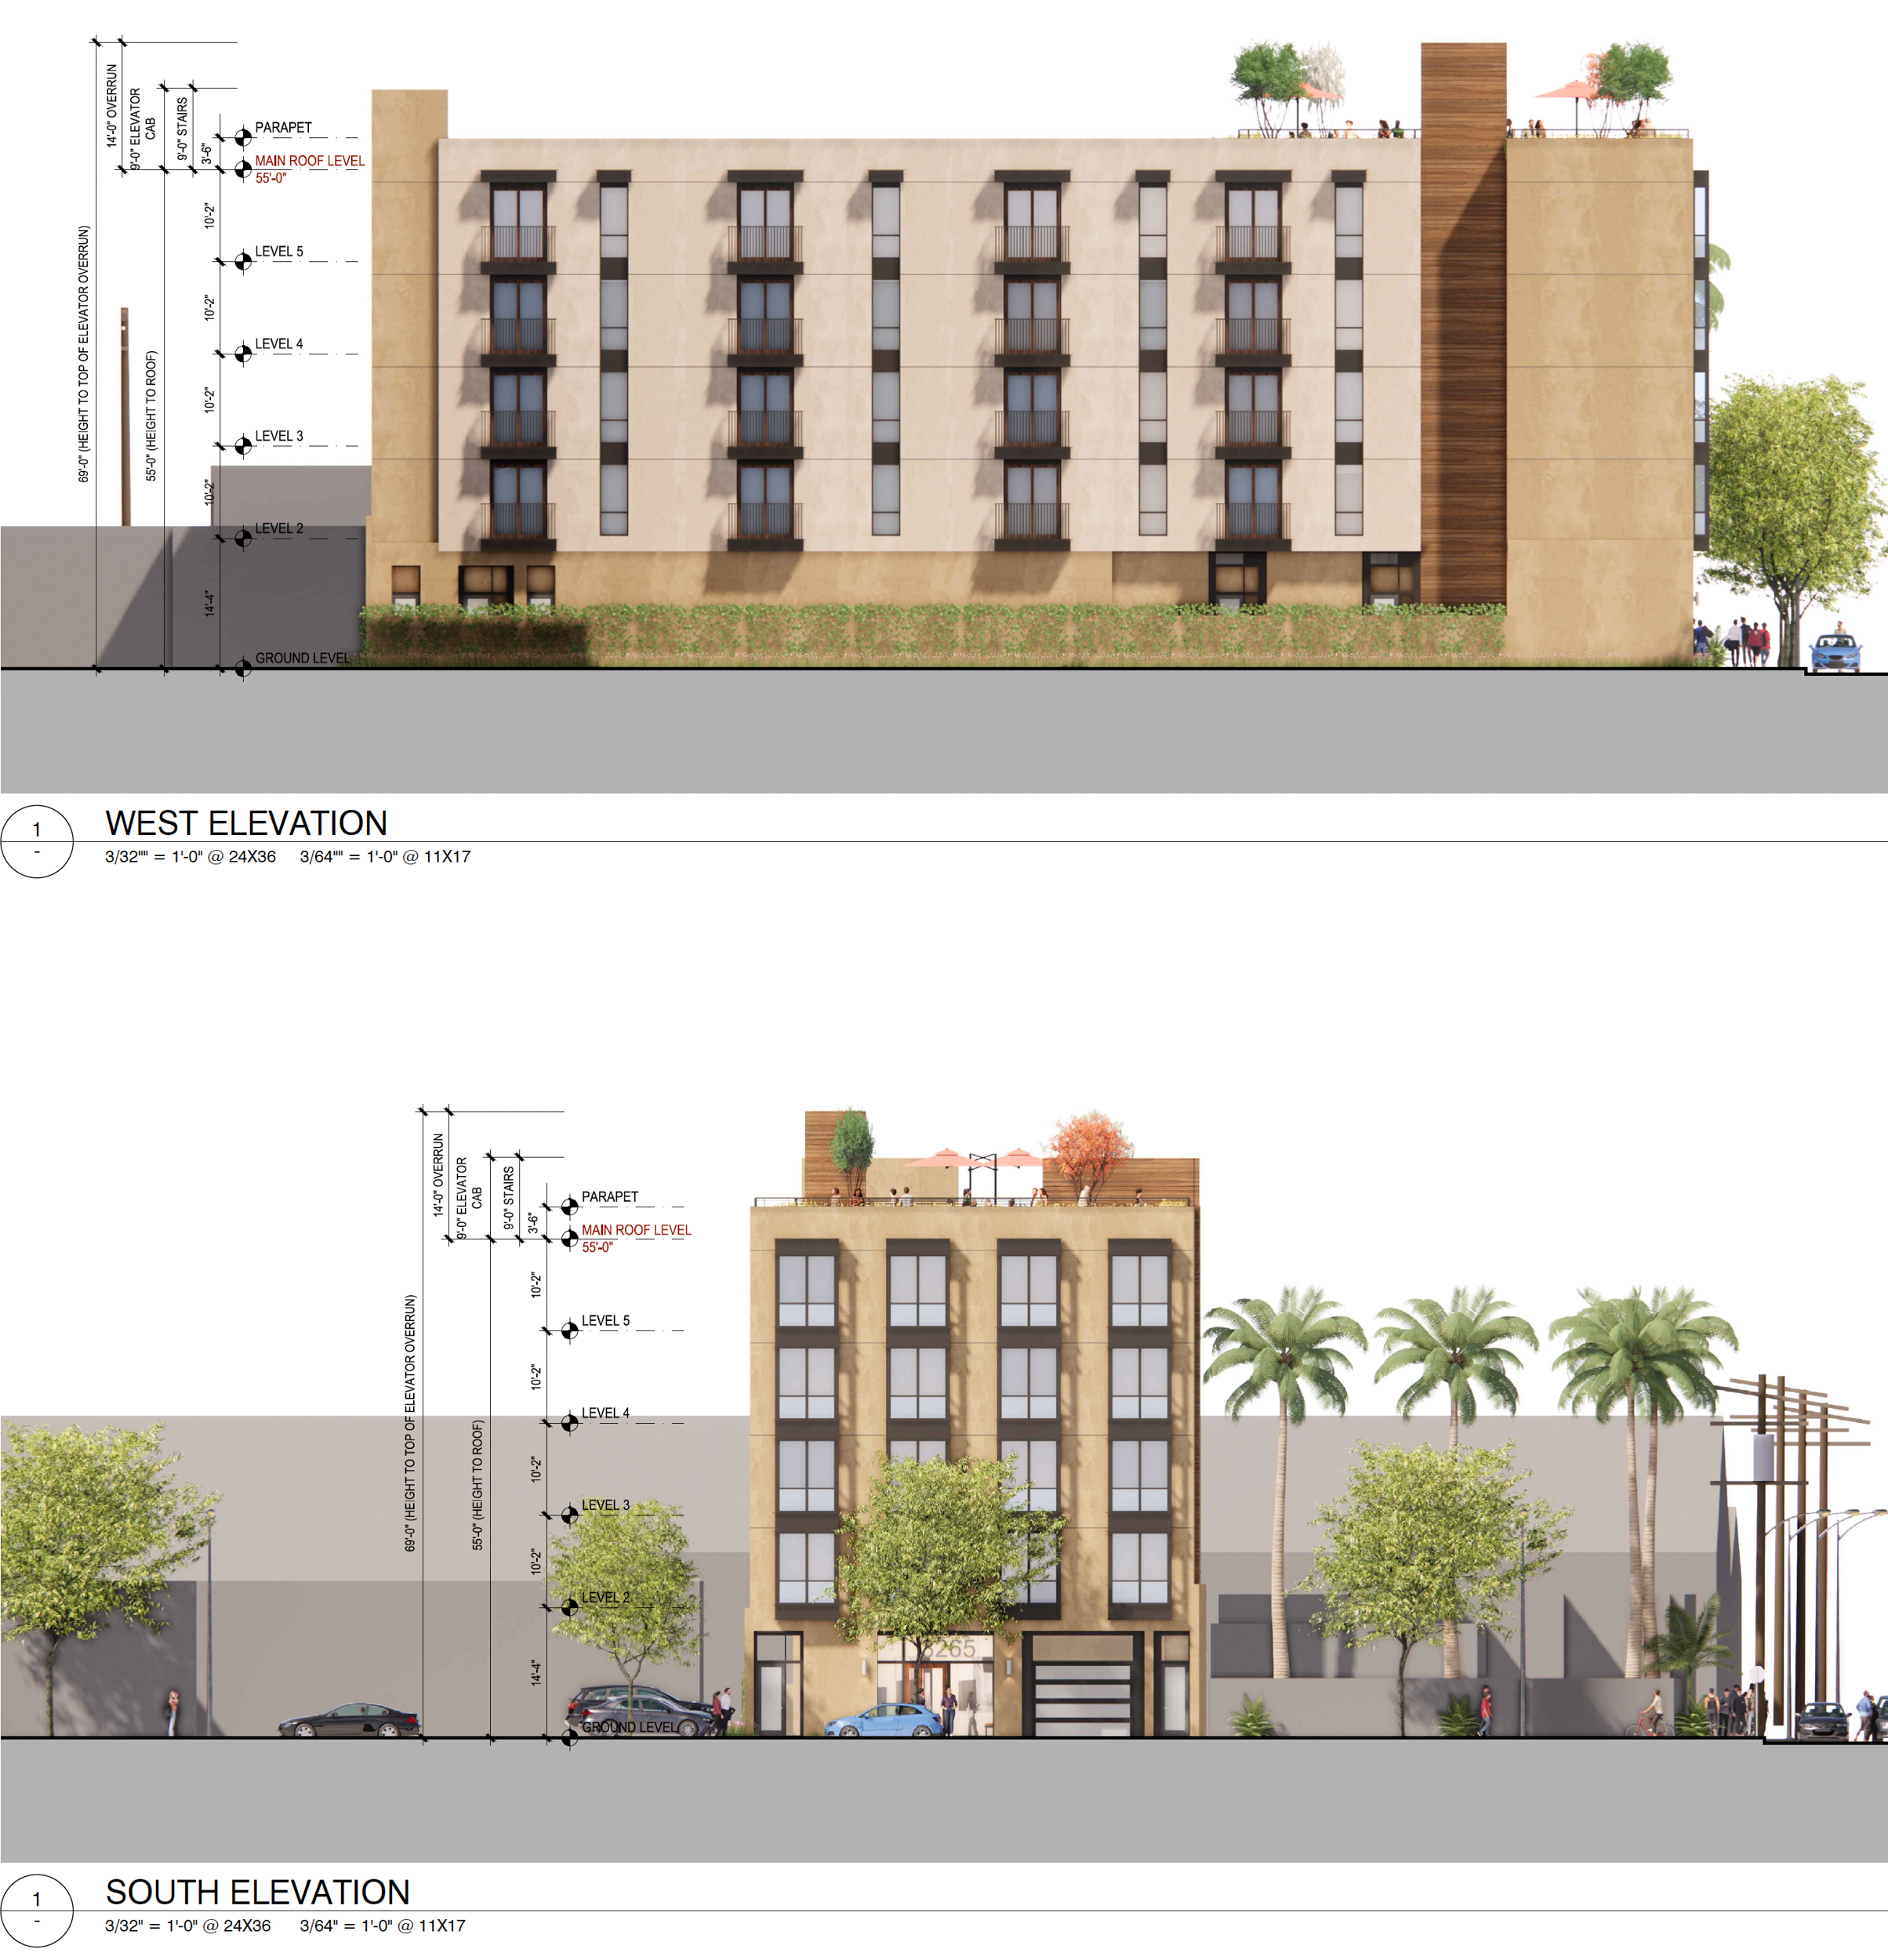 3265 El Camino Real facade elevation, illustration by Trachtenberg Architects